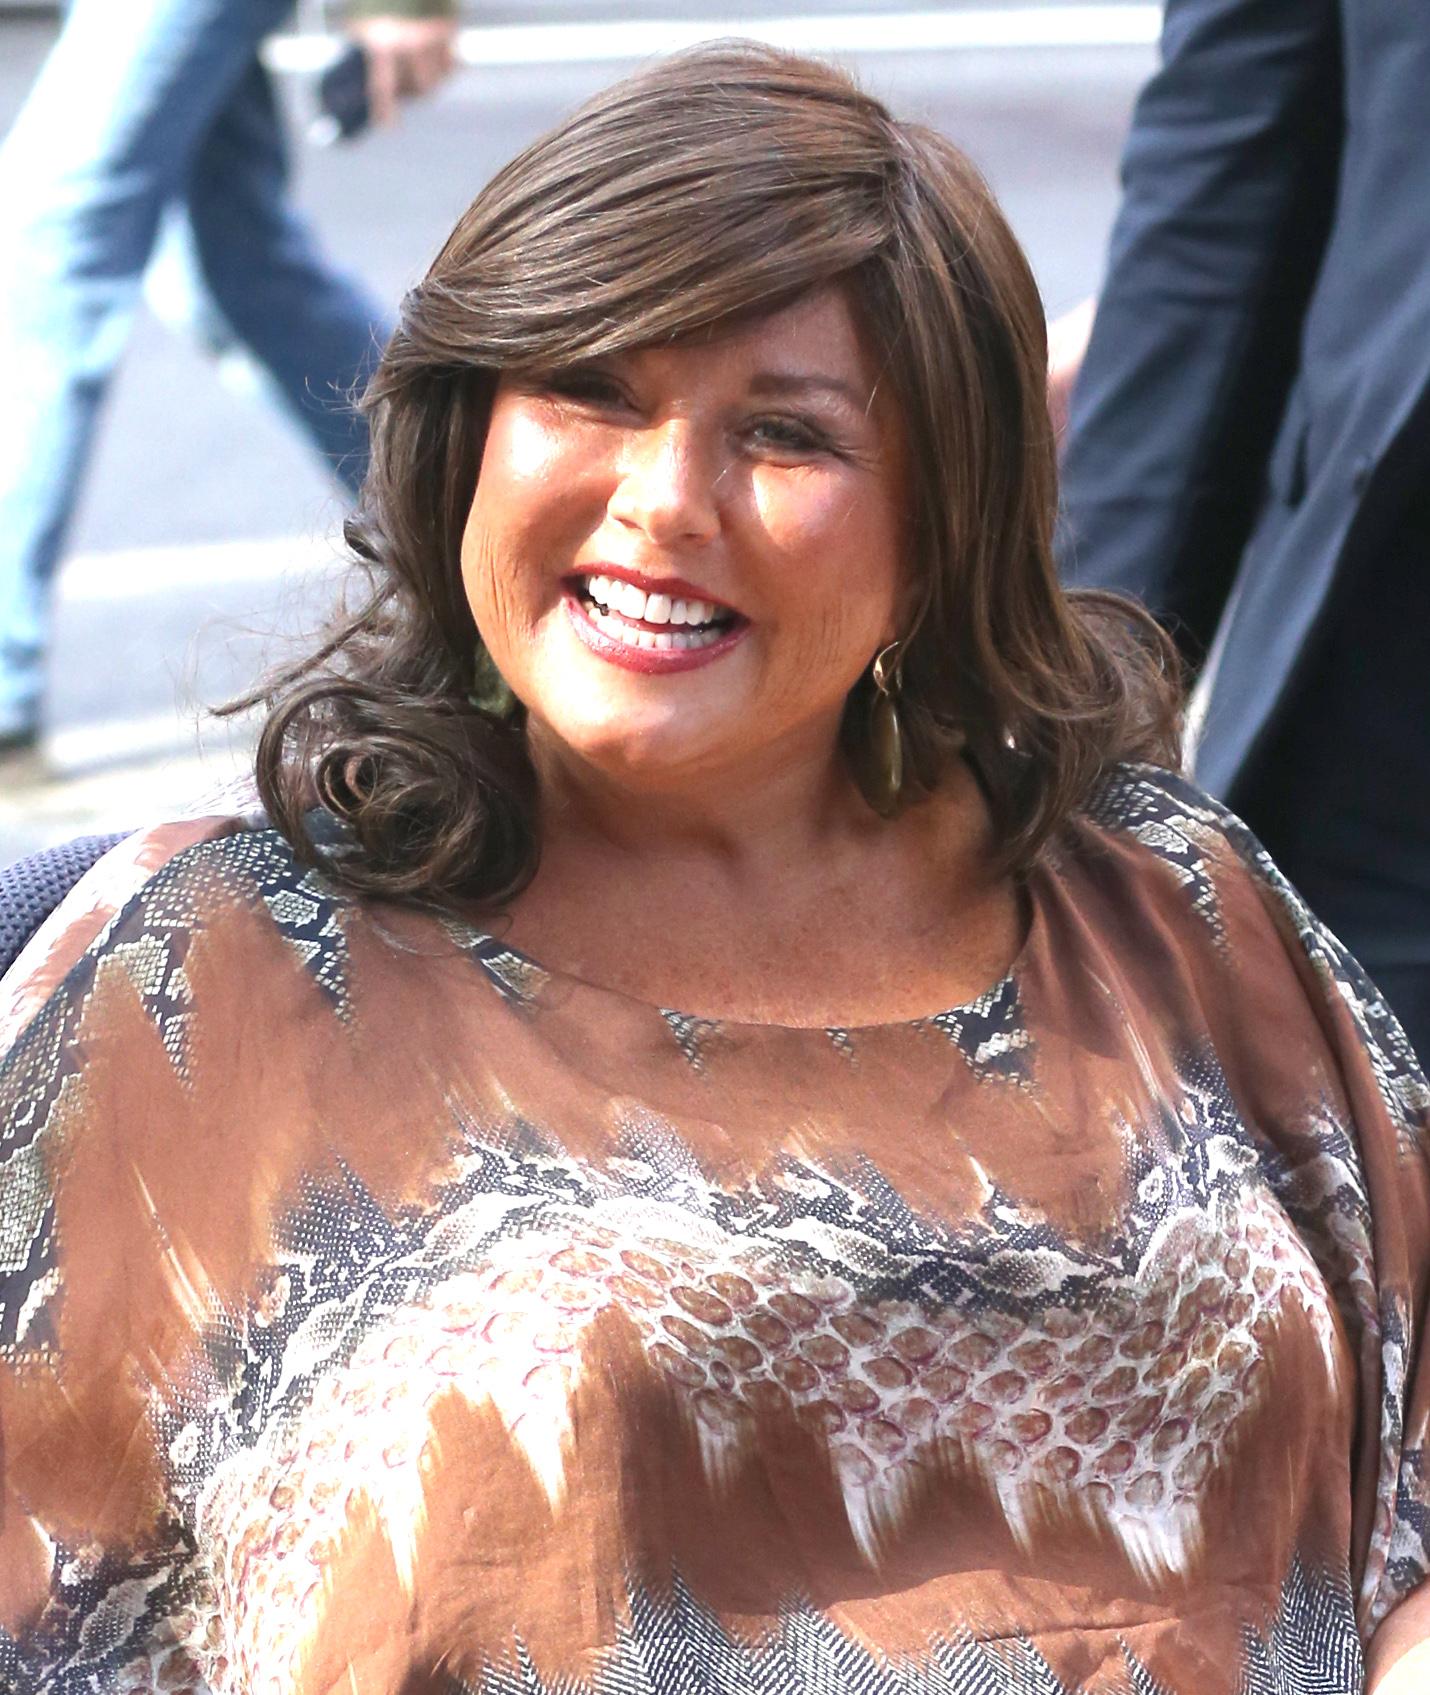 Abby Lee Miller out and about in New York City